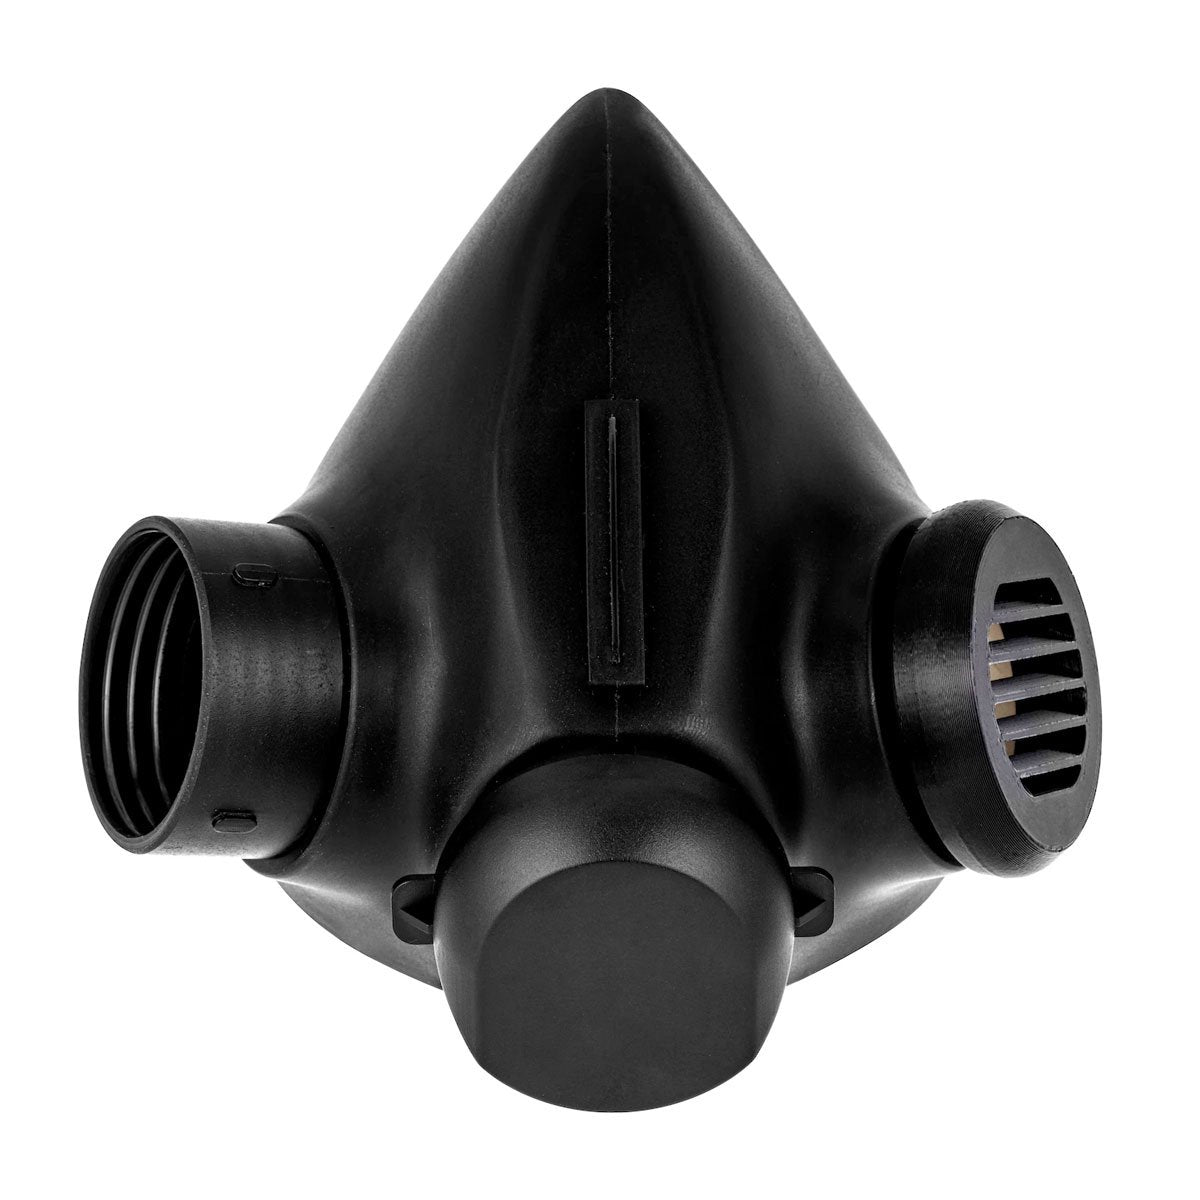 Mira Safety TAPR Tactical Air-Purifying Respirator Mask Universal Fit Protective Gear MIRA Safety Left-Handed TAPR Body Tactical Gear Supplier Tactical Distributors Australia